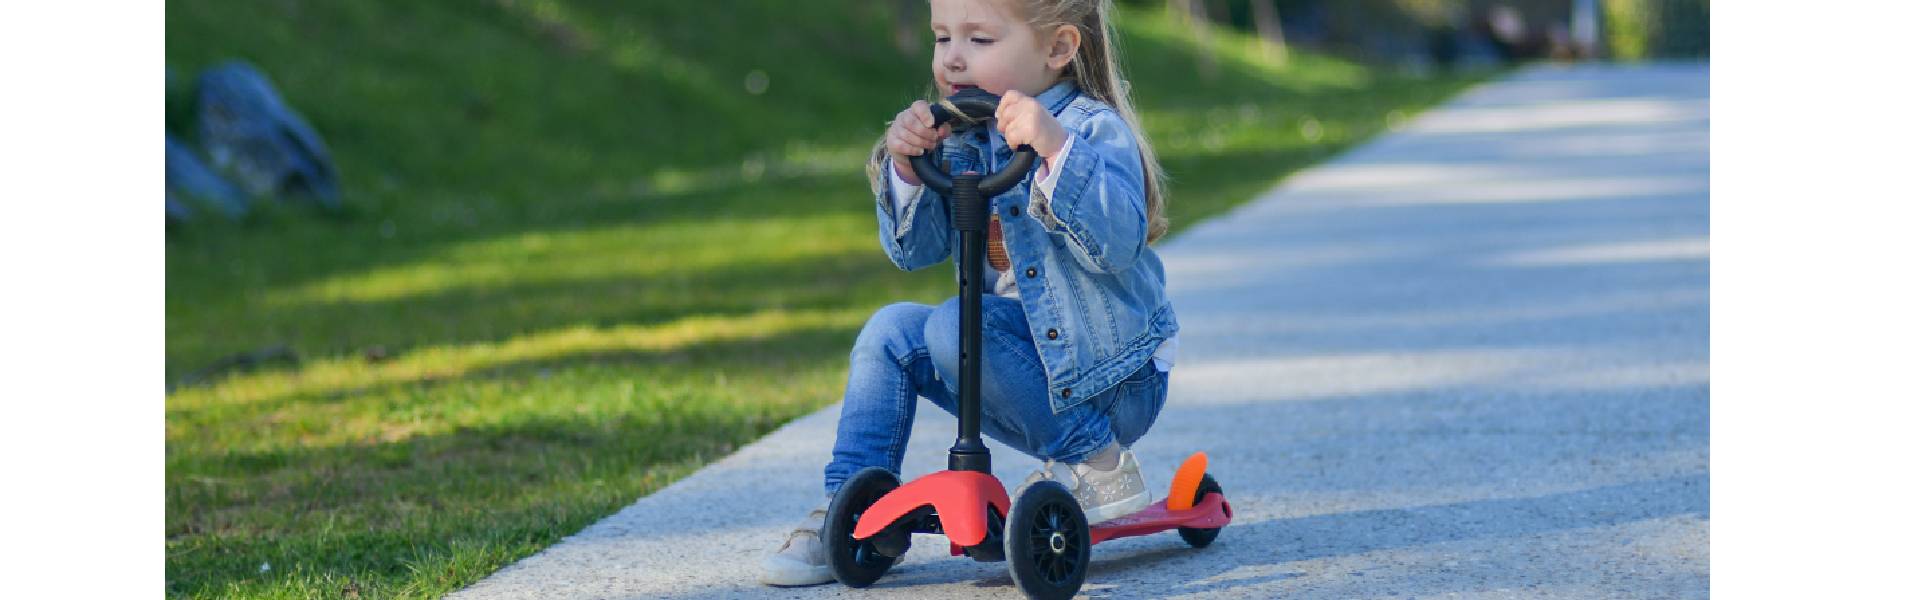 a-cute-girl-riding-a-outdoor-toys-for-kids-called-chipmunk-scooter